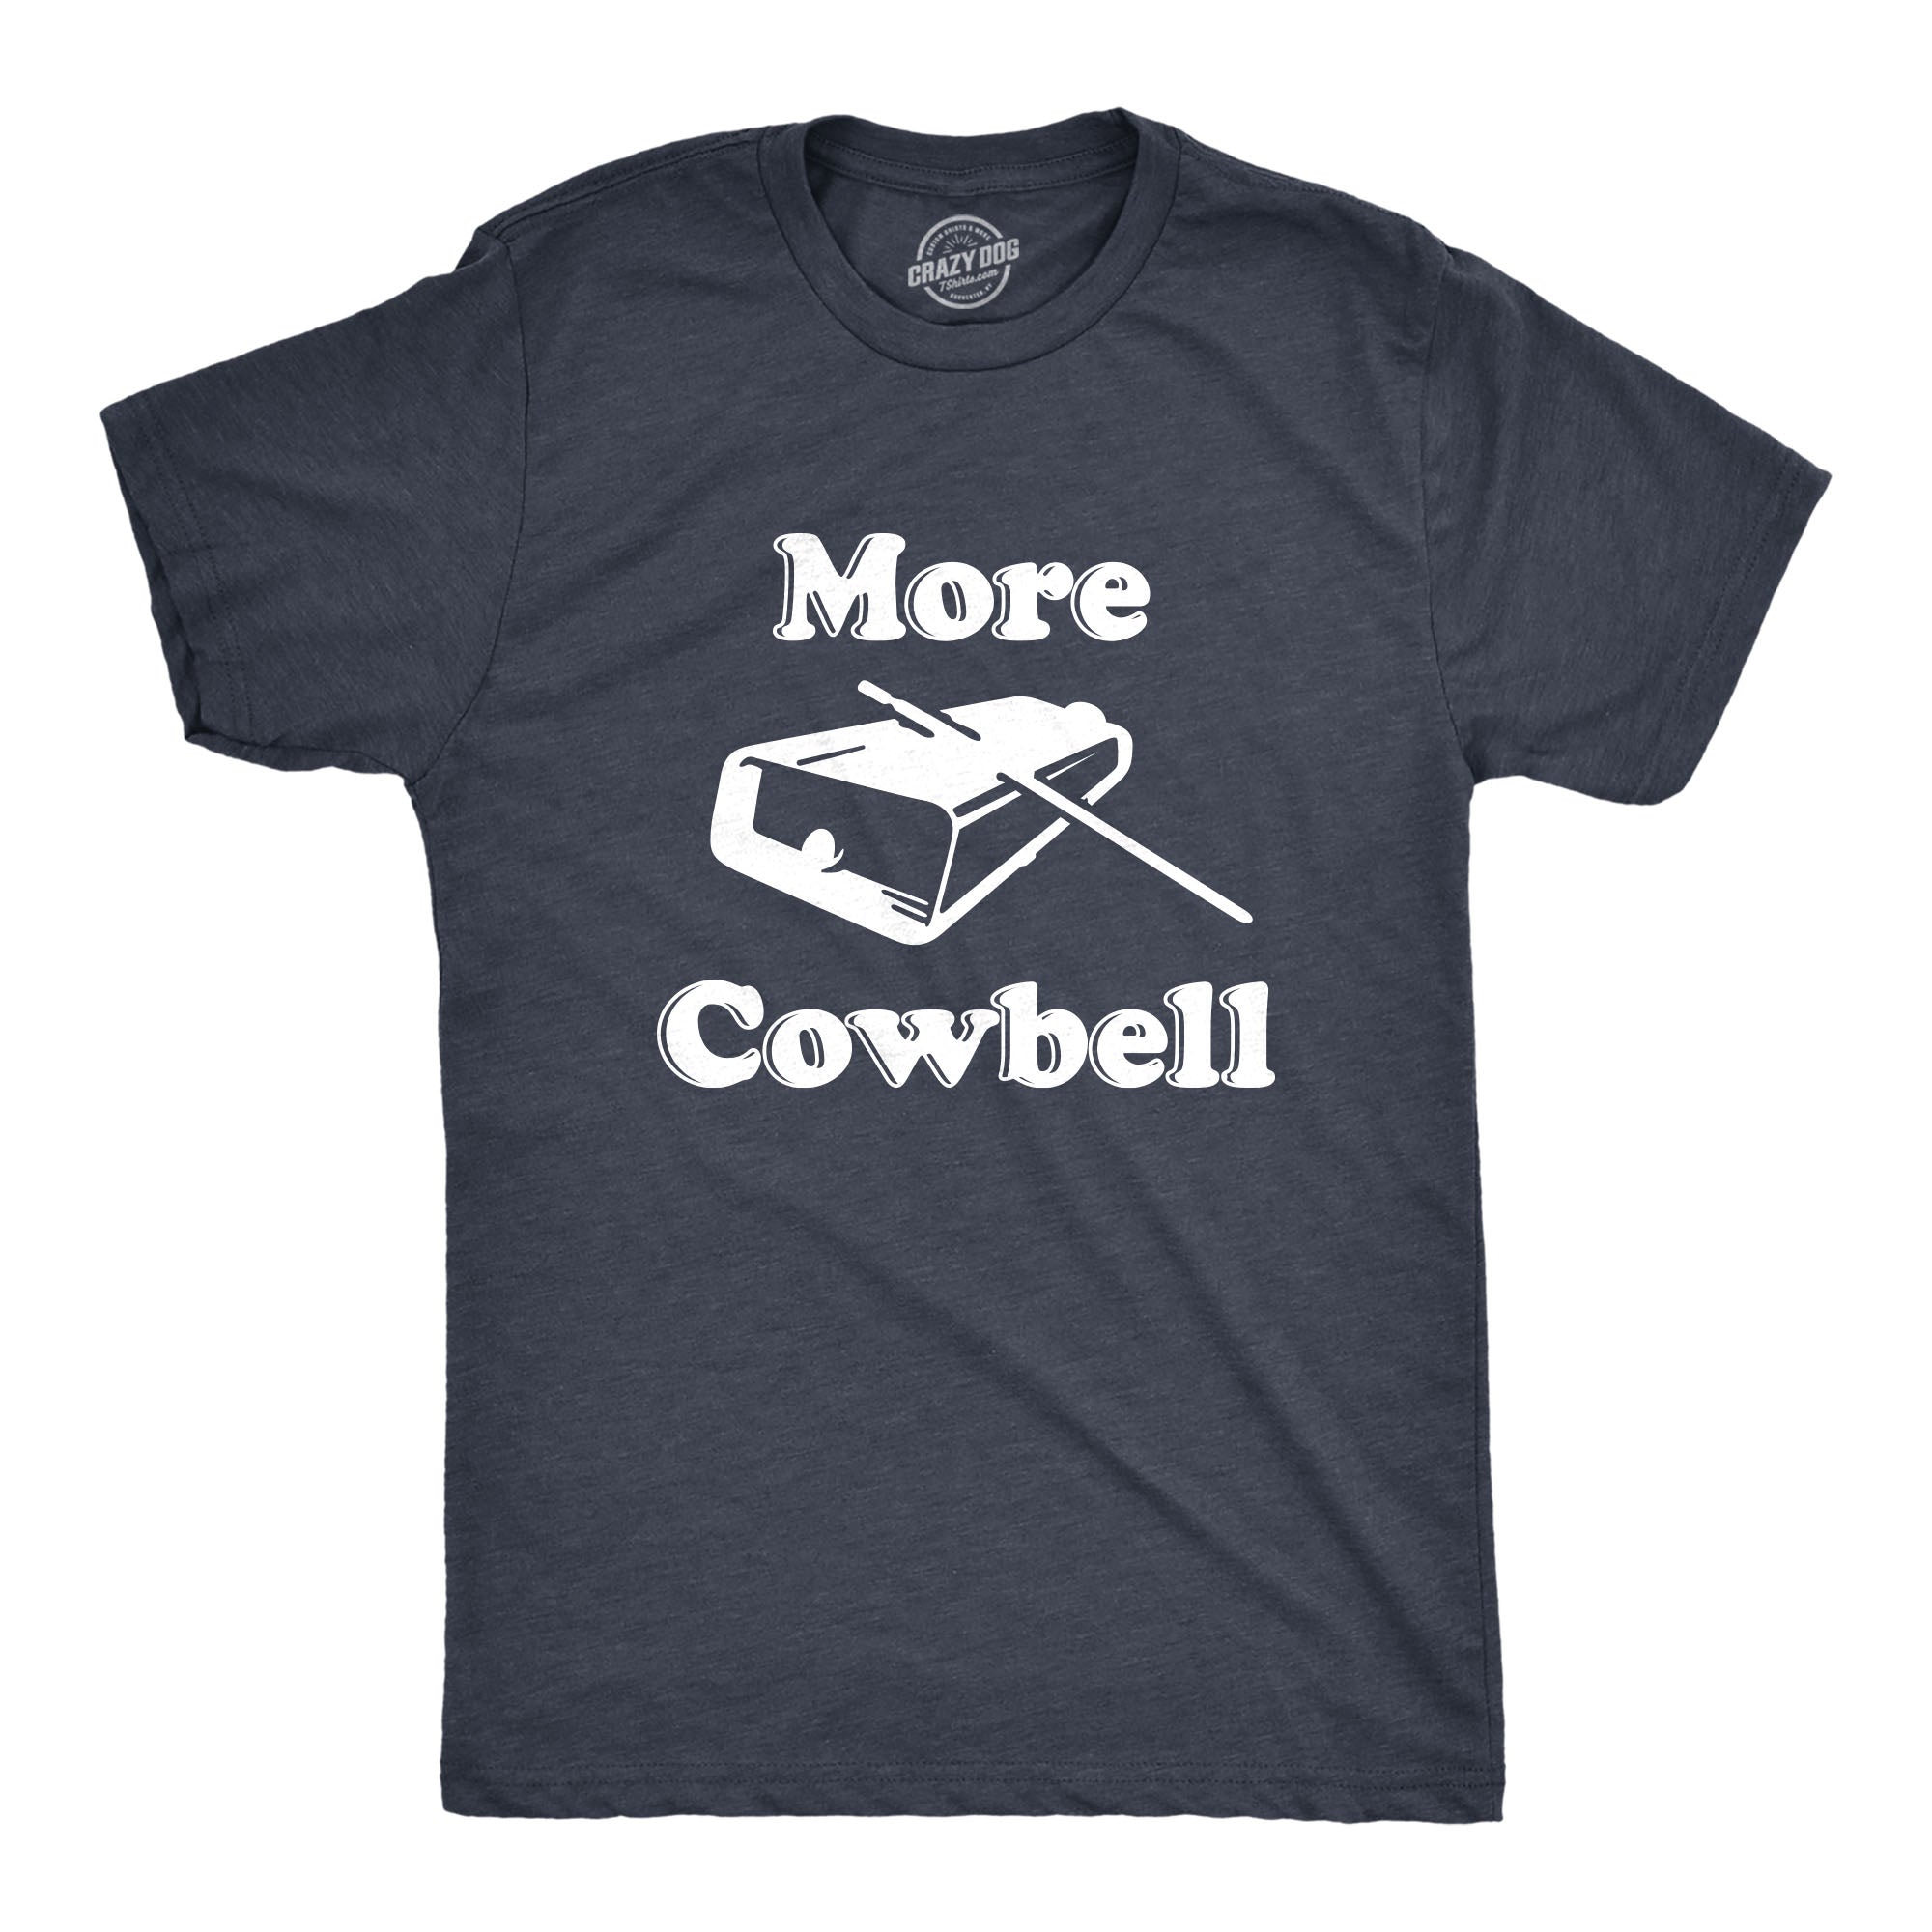 Funny Heather Navy - More Cowbell More Cowbell Mens T Shirt Nerdy TV & Movies Music Tee